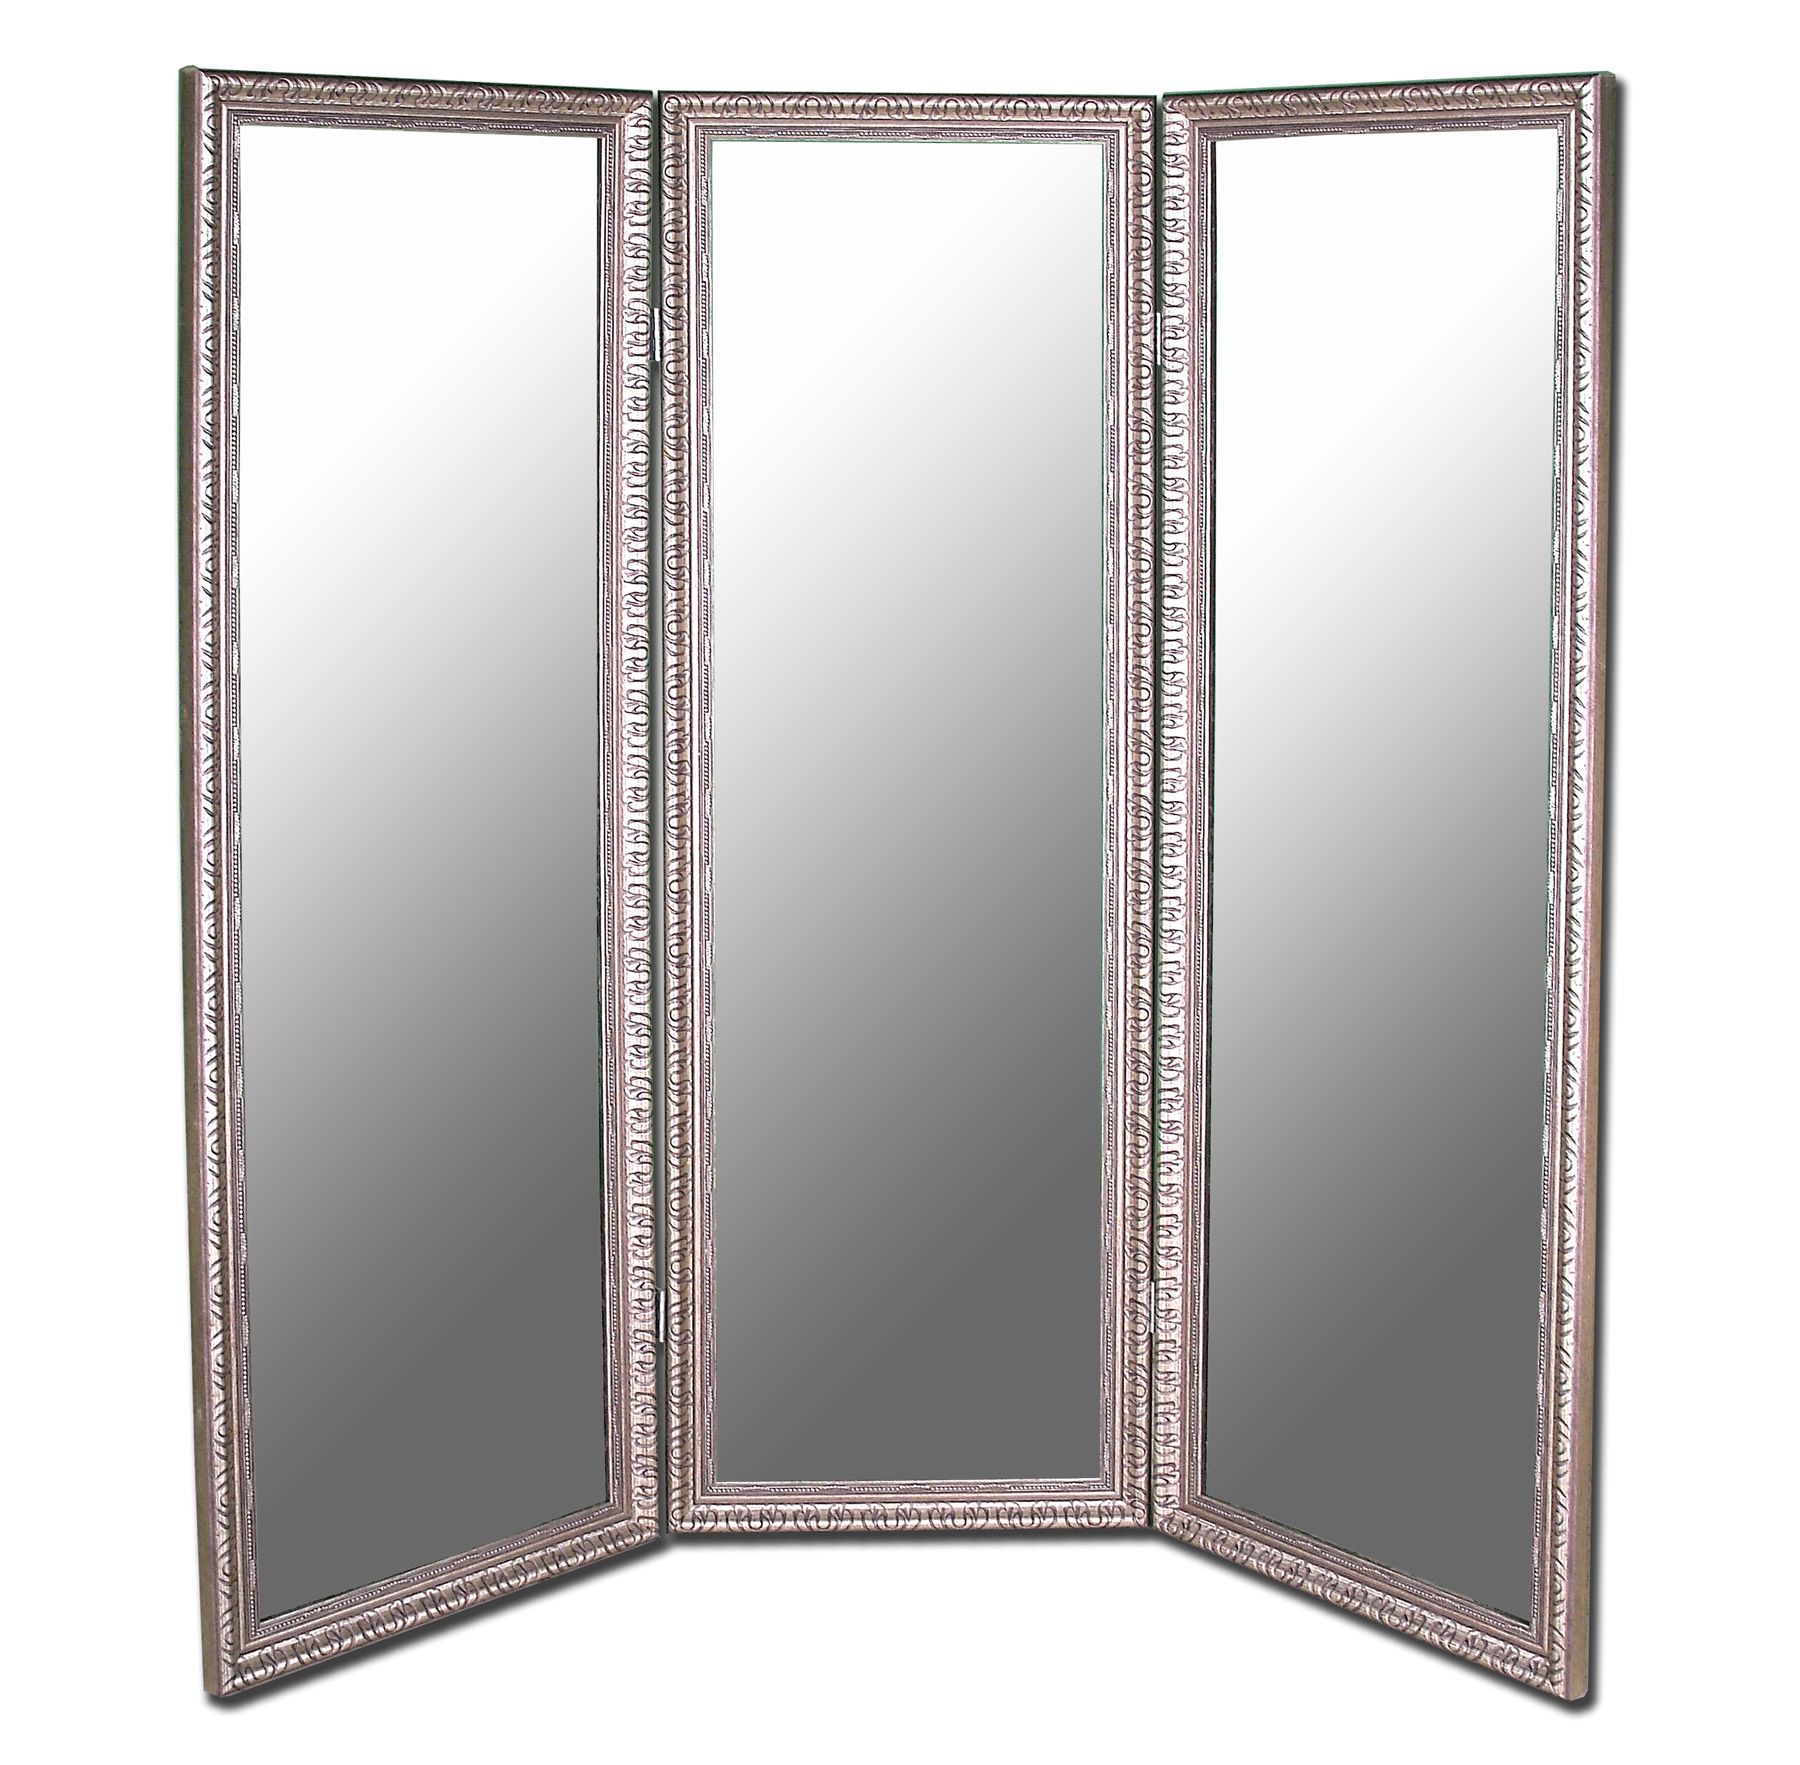 Hitchcock Butterfield 6702 Pmrd Antique Silver 3 Panel Mirror Inside Linen Fold Silver Wall Mirrors (View 11 of 15)